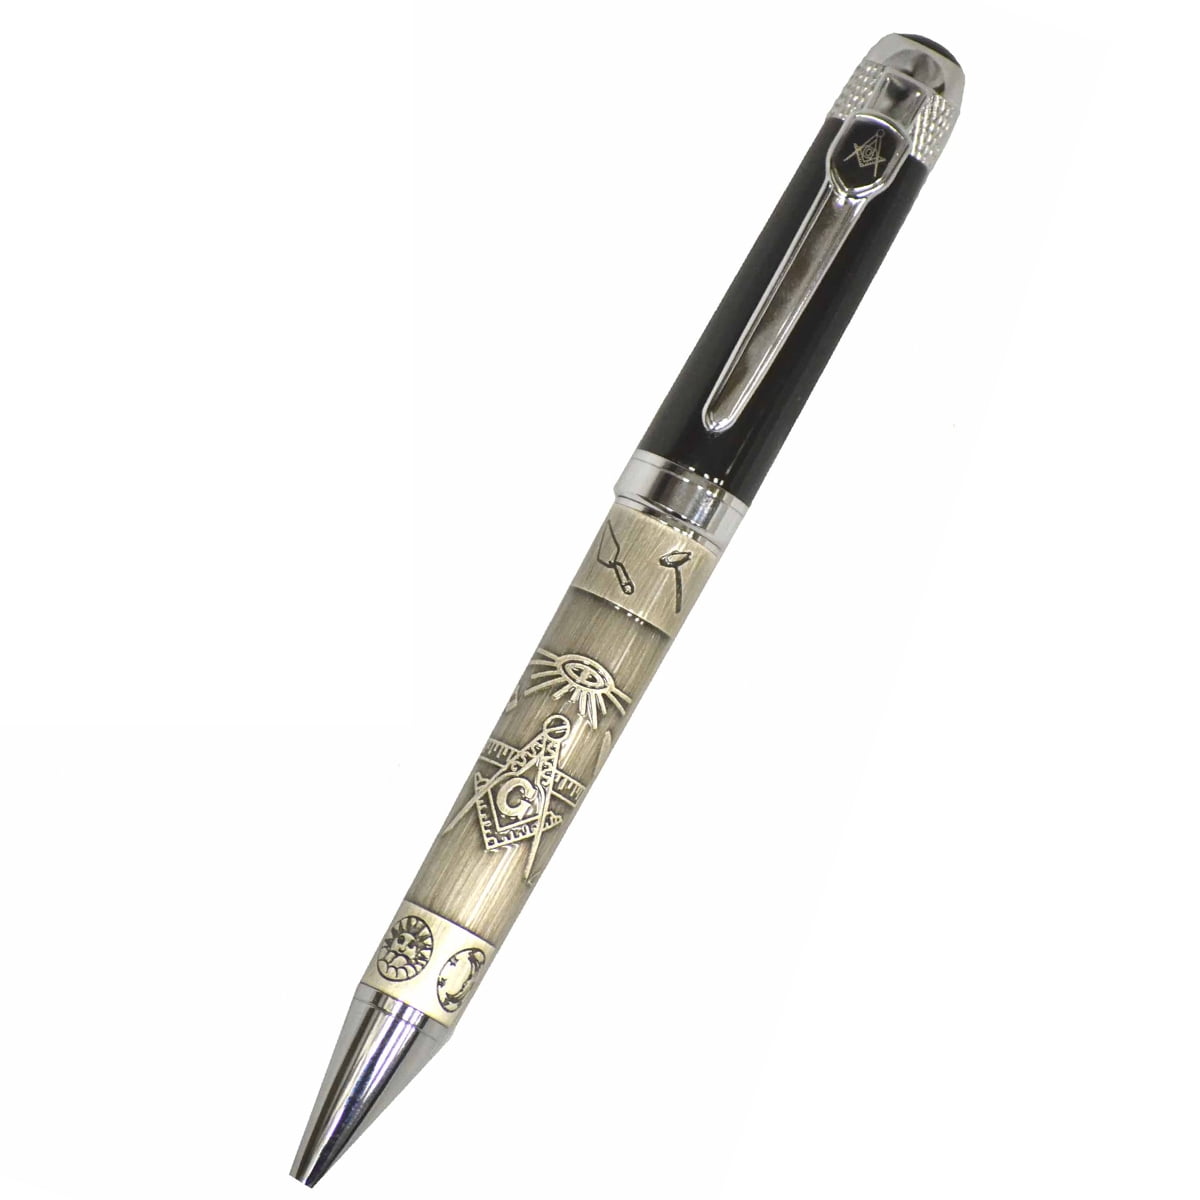 Details about   ONE BLUE LODGE PEN QUALITY HEAVY WEIGHT Mason Masonic F&AM GREAT OFFICER GIFT 